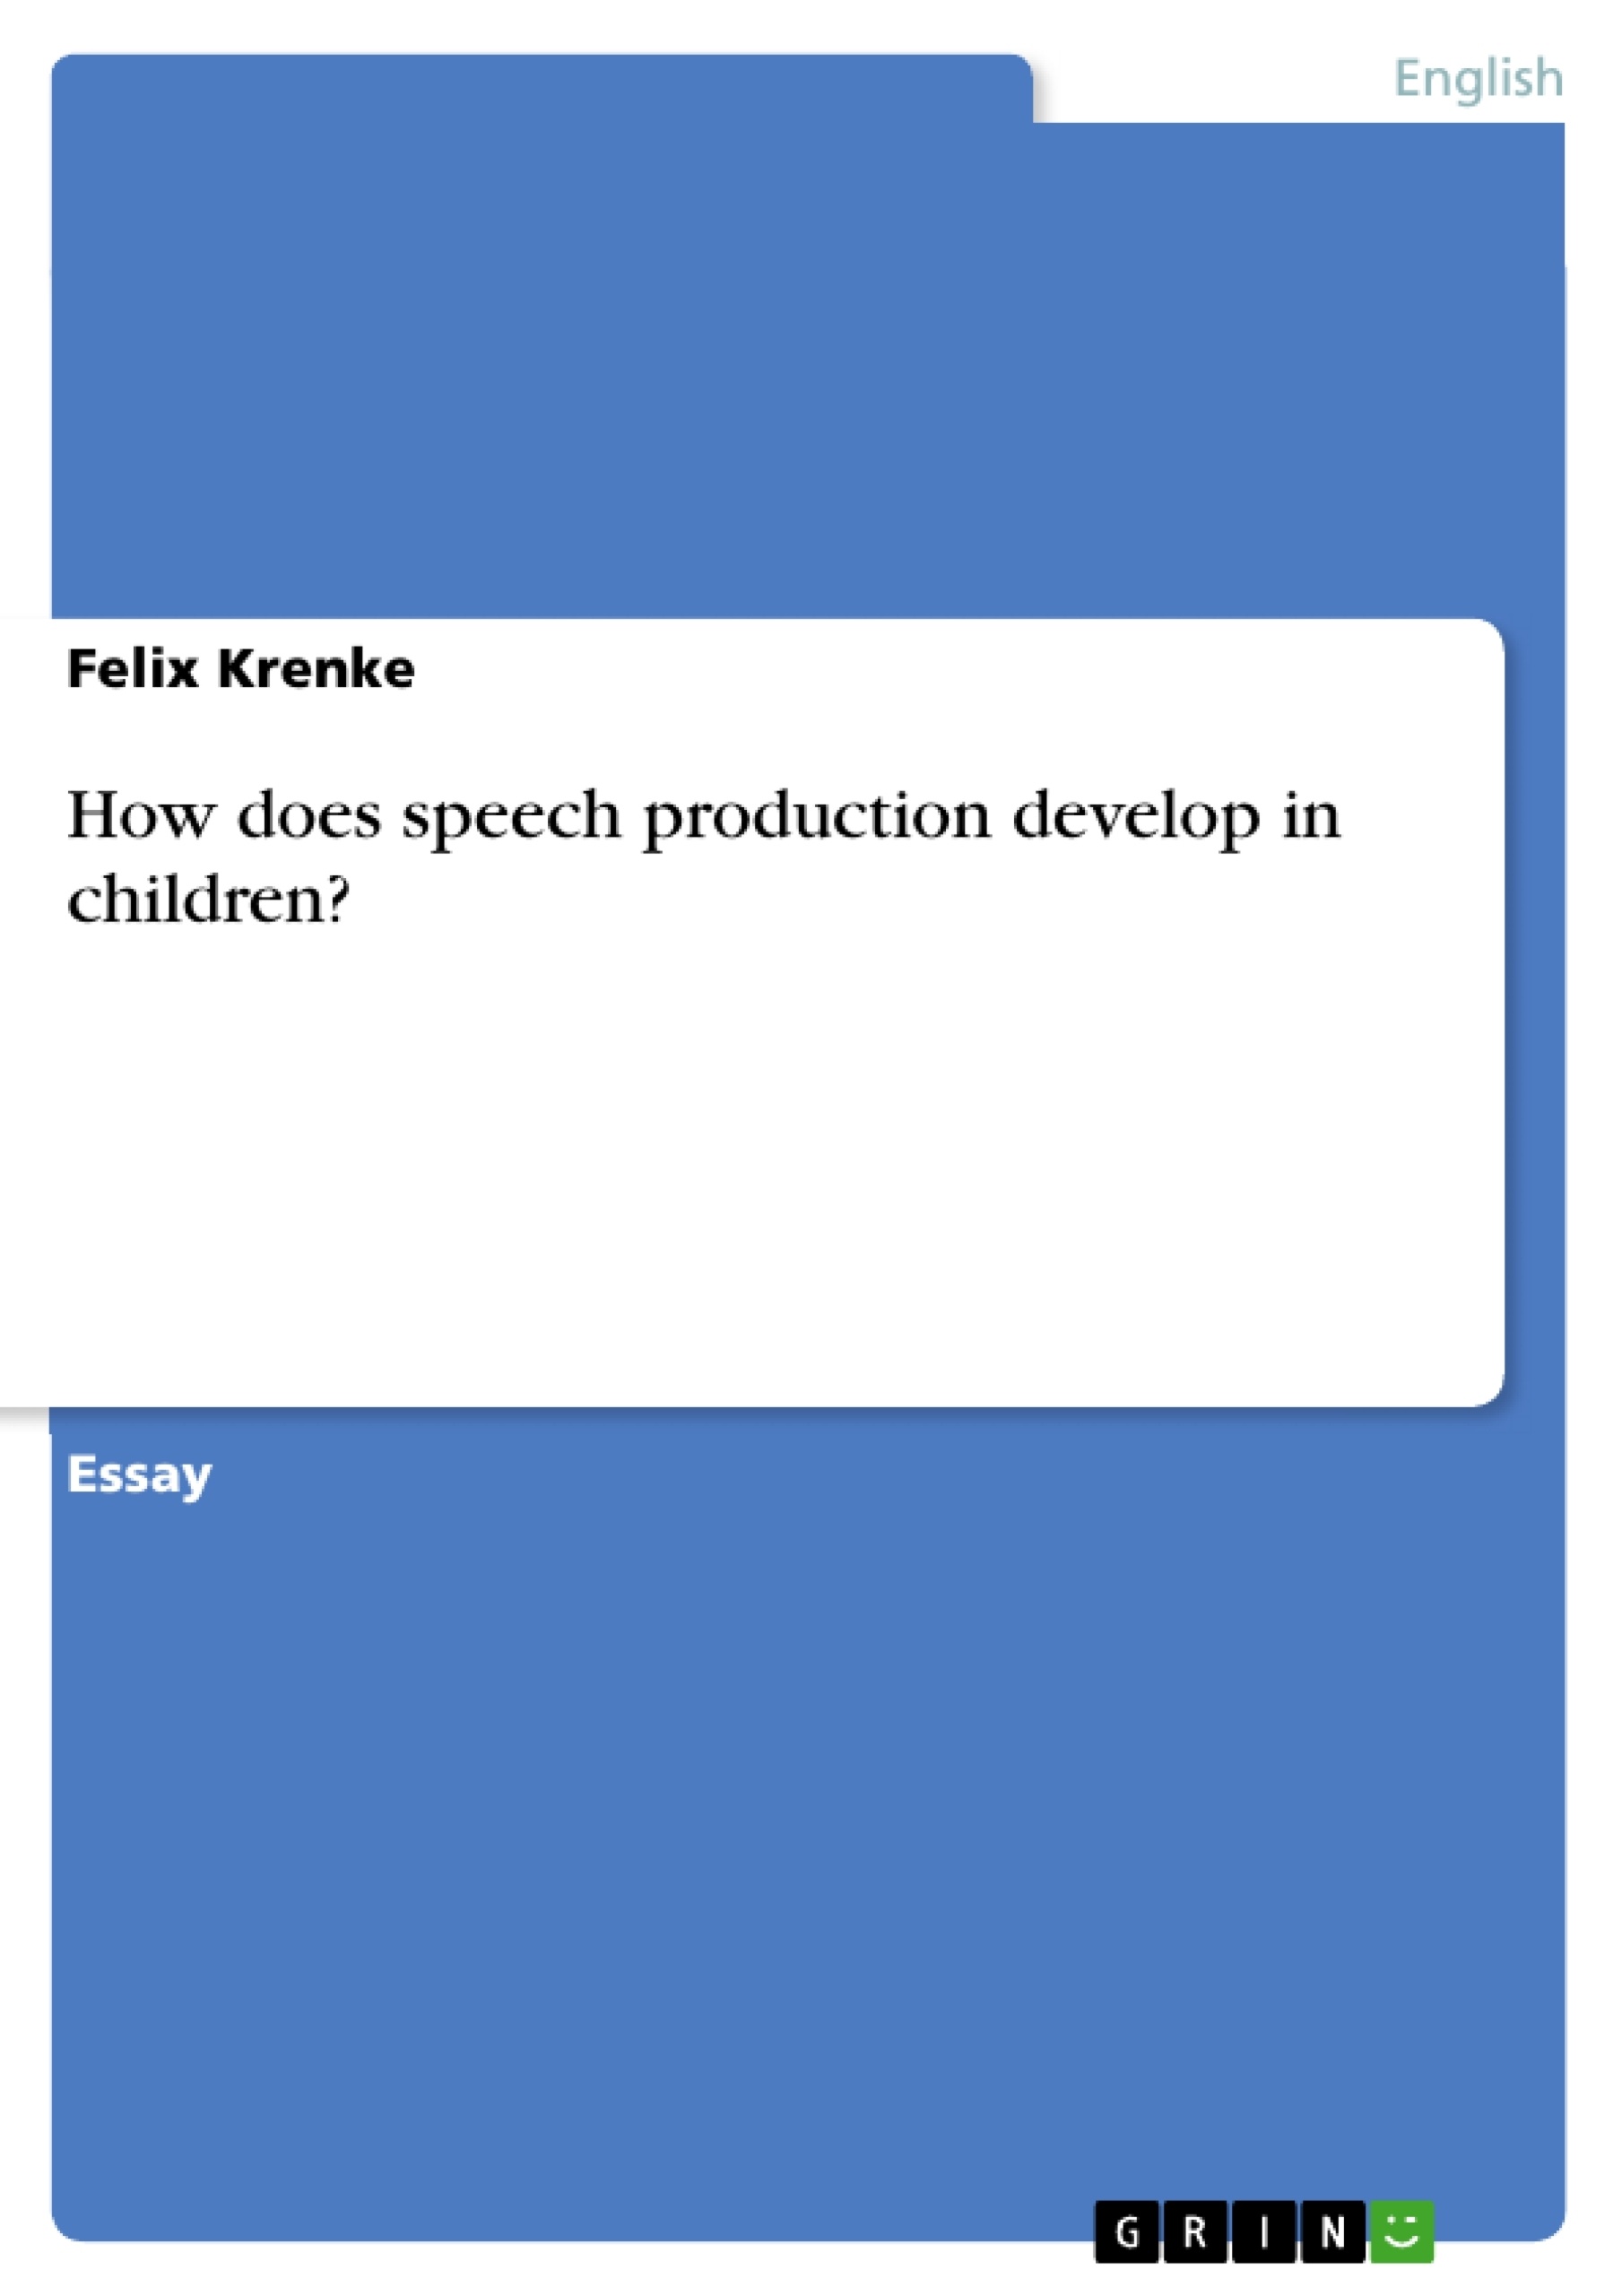 Title: How does speech production develop in children?